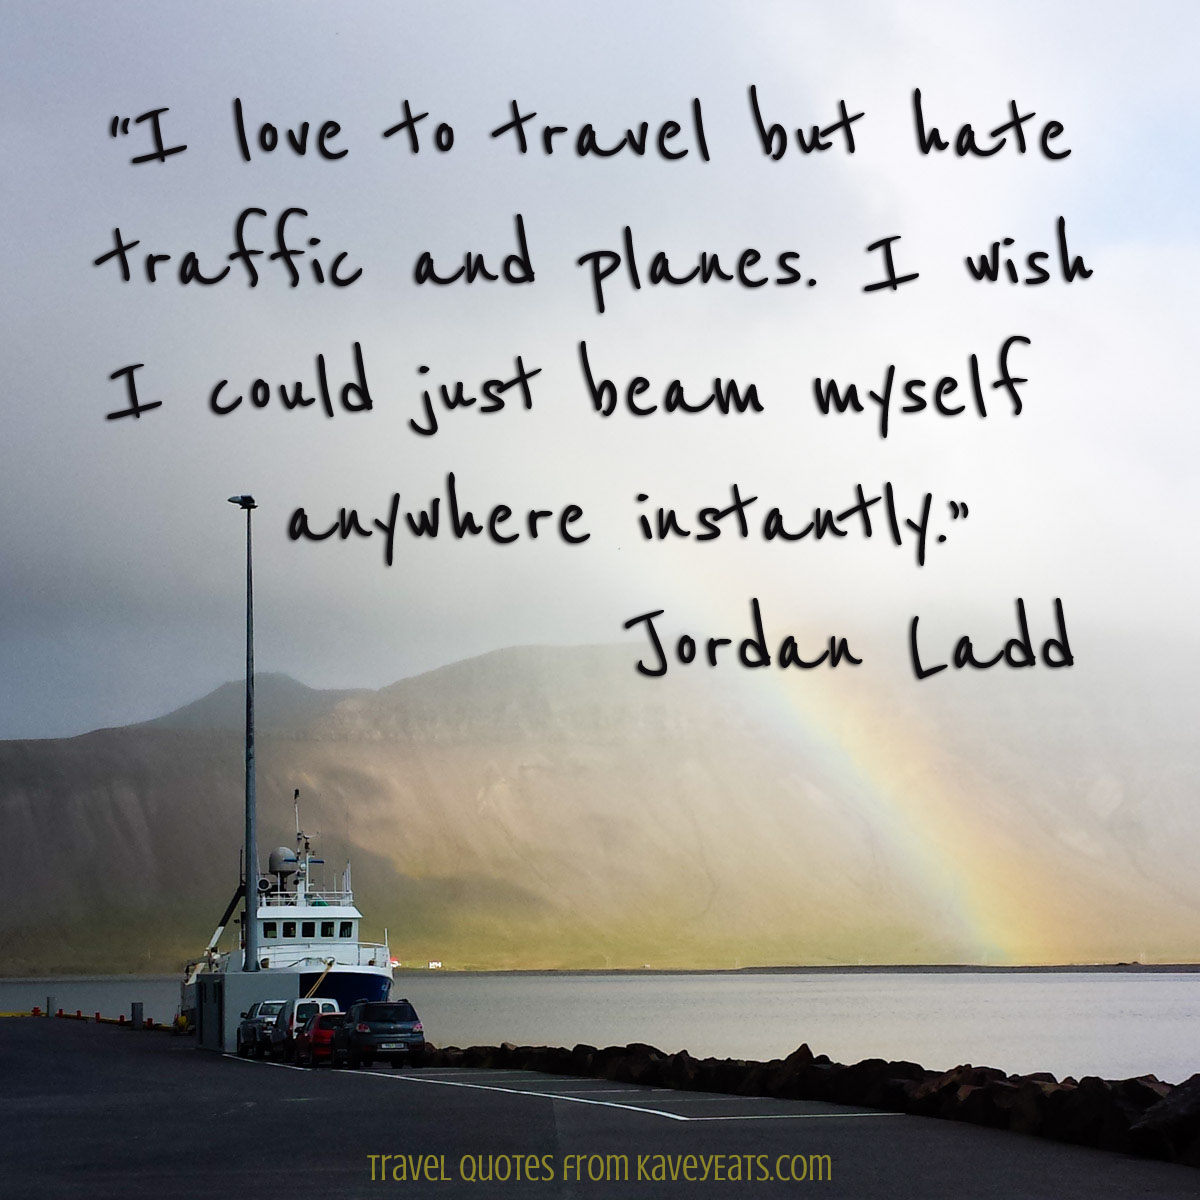 “I love to travel but hate traffic and planes. I wish I could just beam myself anywhere instantly.” Jordan Ladd